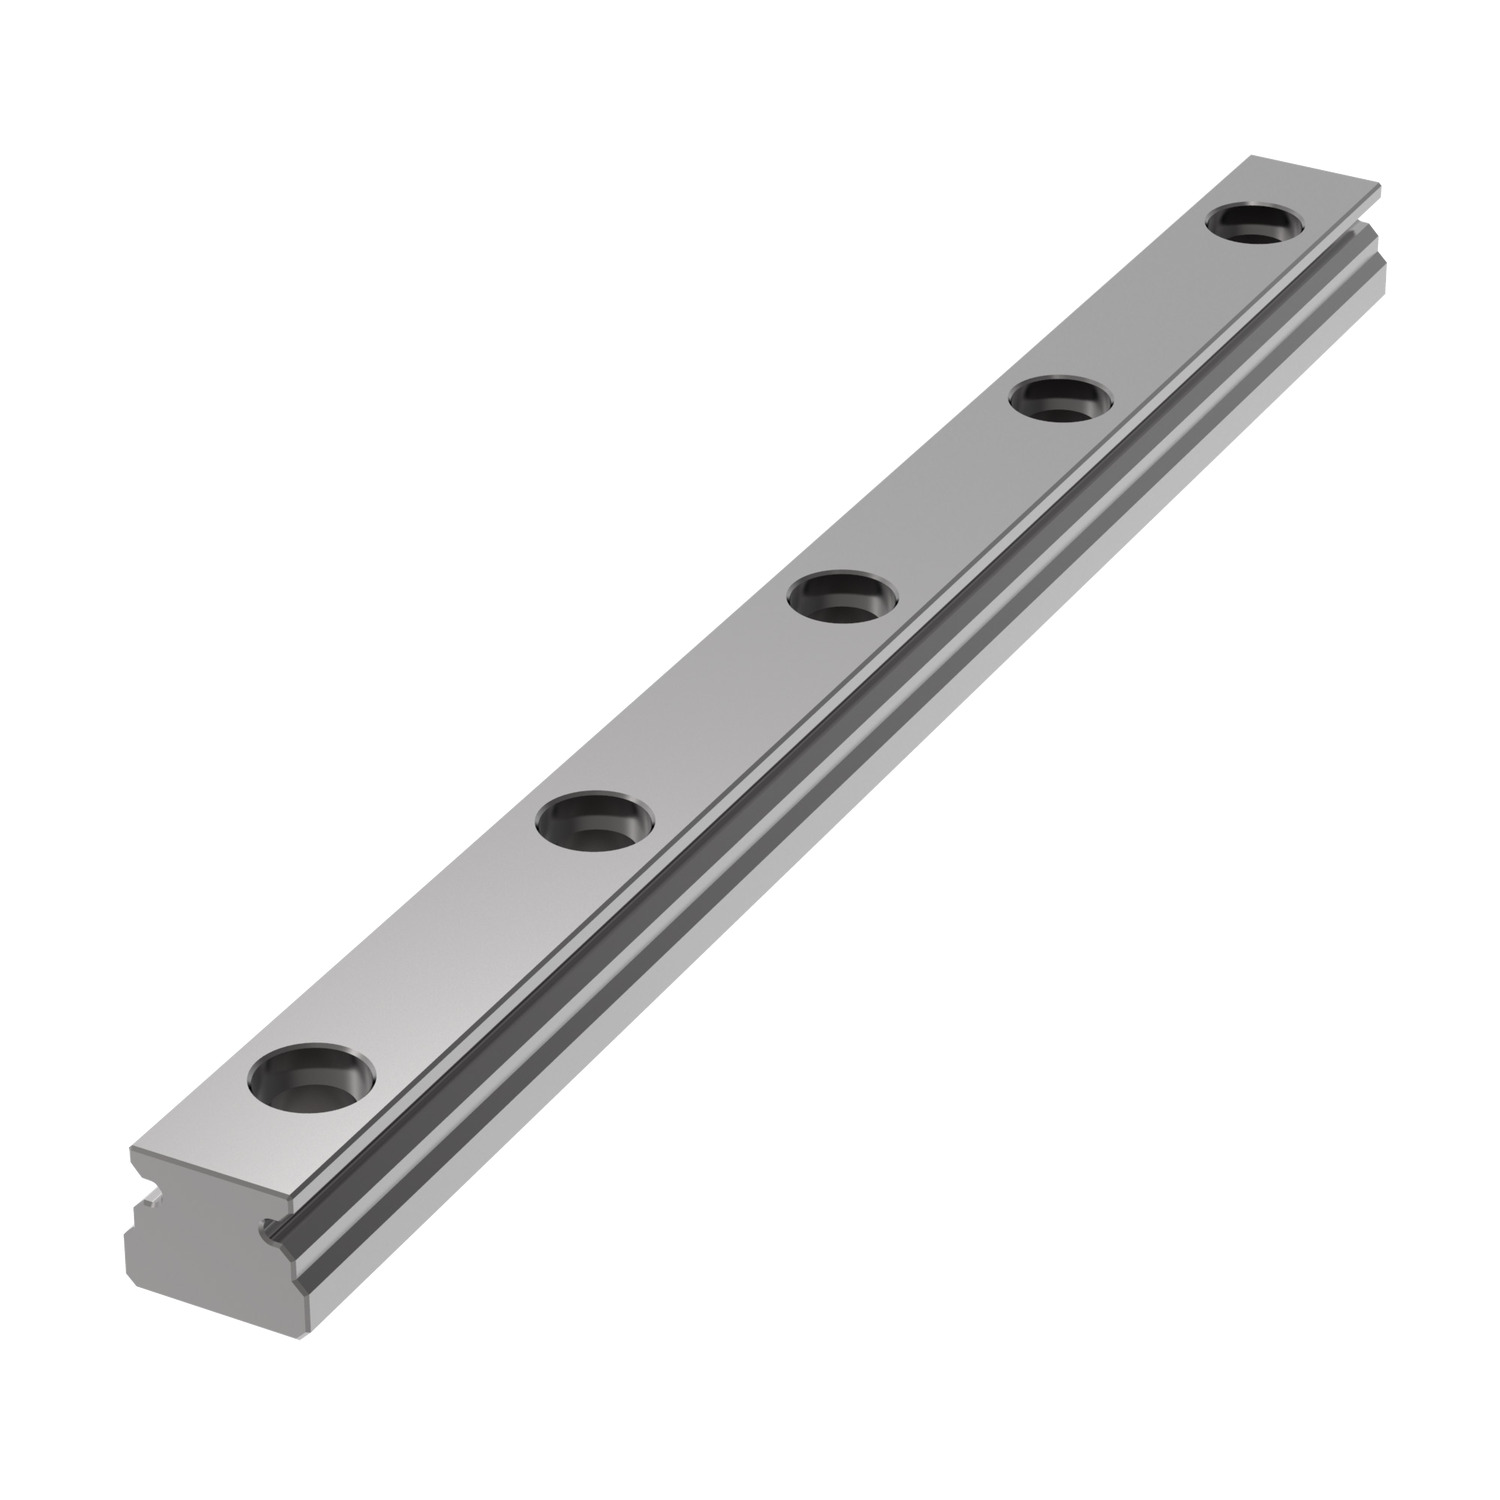 5mm Miniature Linear Rail 5mm standard width miniature linear rails. Corrosion resistant hardened stainless steel. Supplied with special low profile screws.